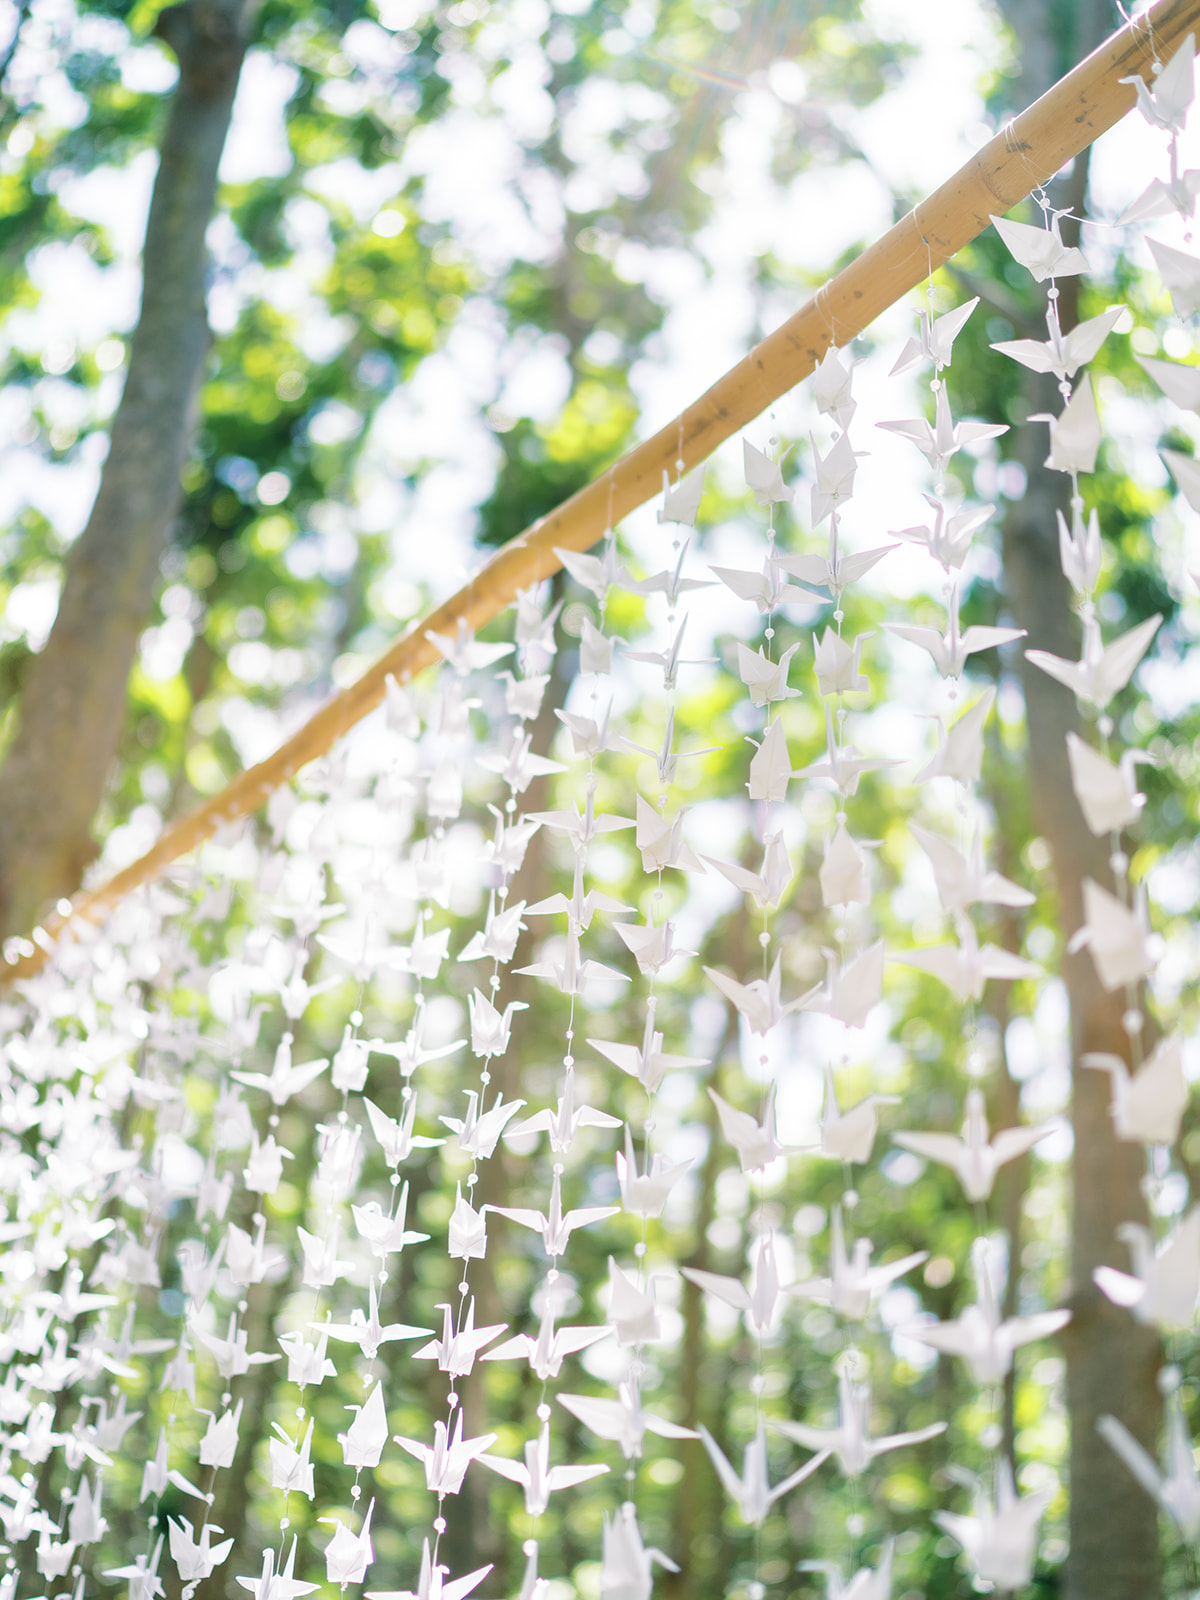 A serene outdoor setting featuring strings of paper cranes hung amongst trees with dappled sunlight filtering through